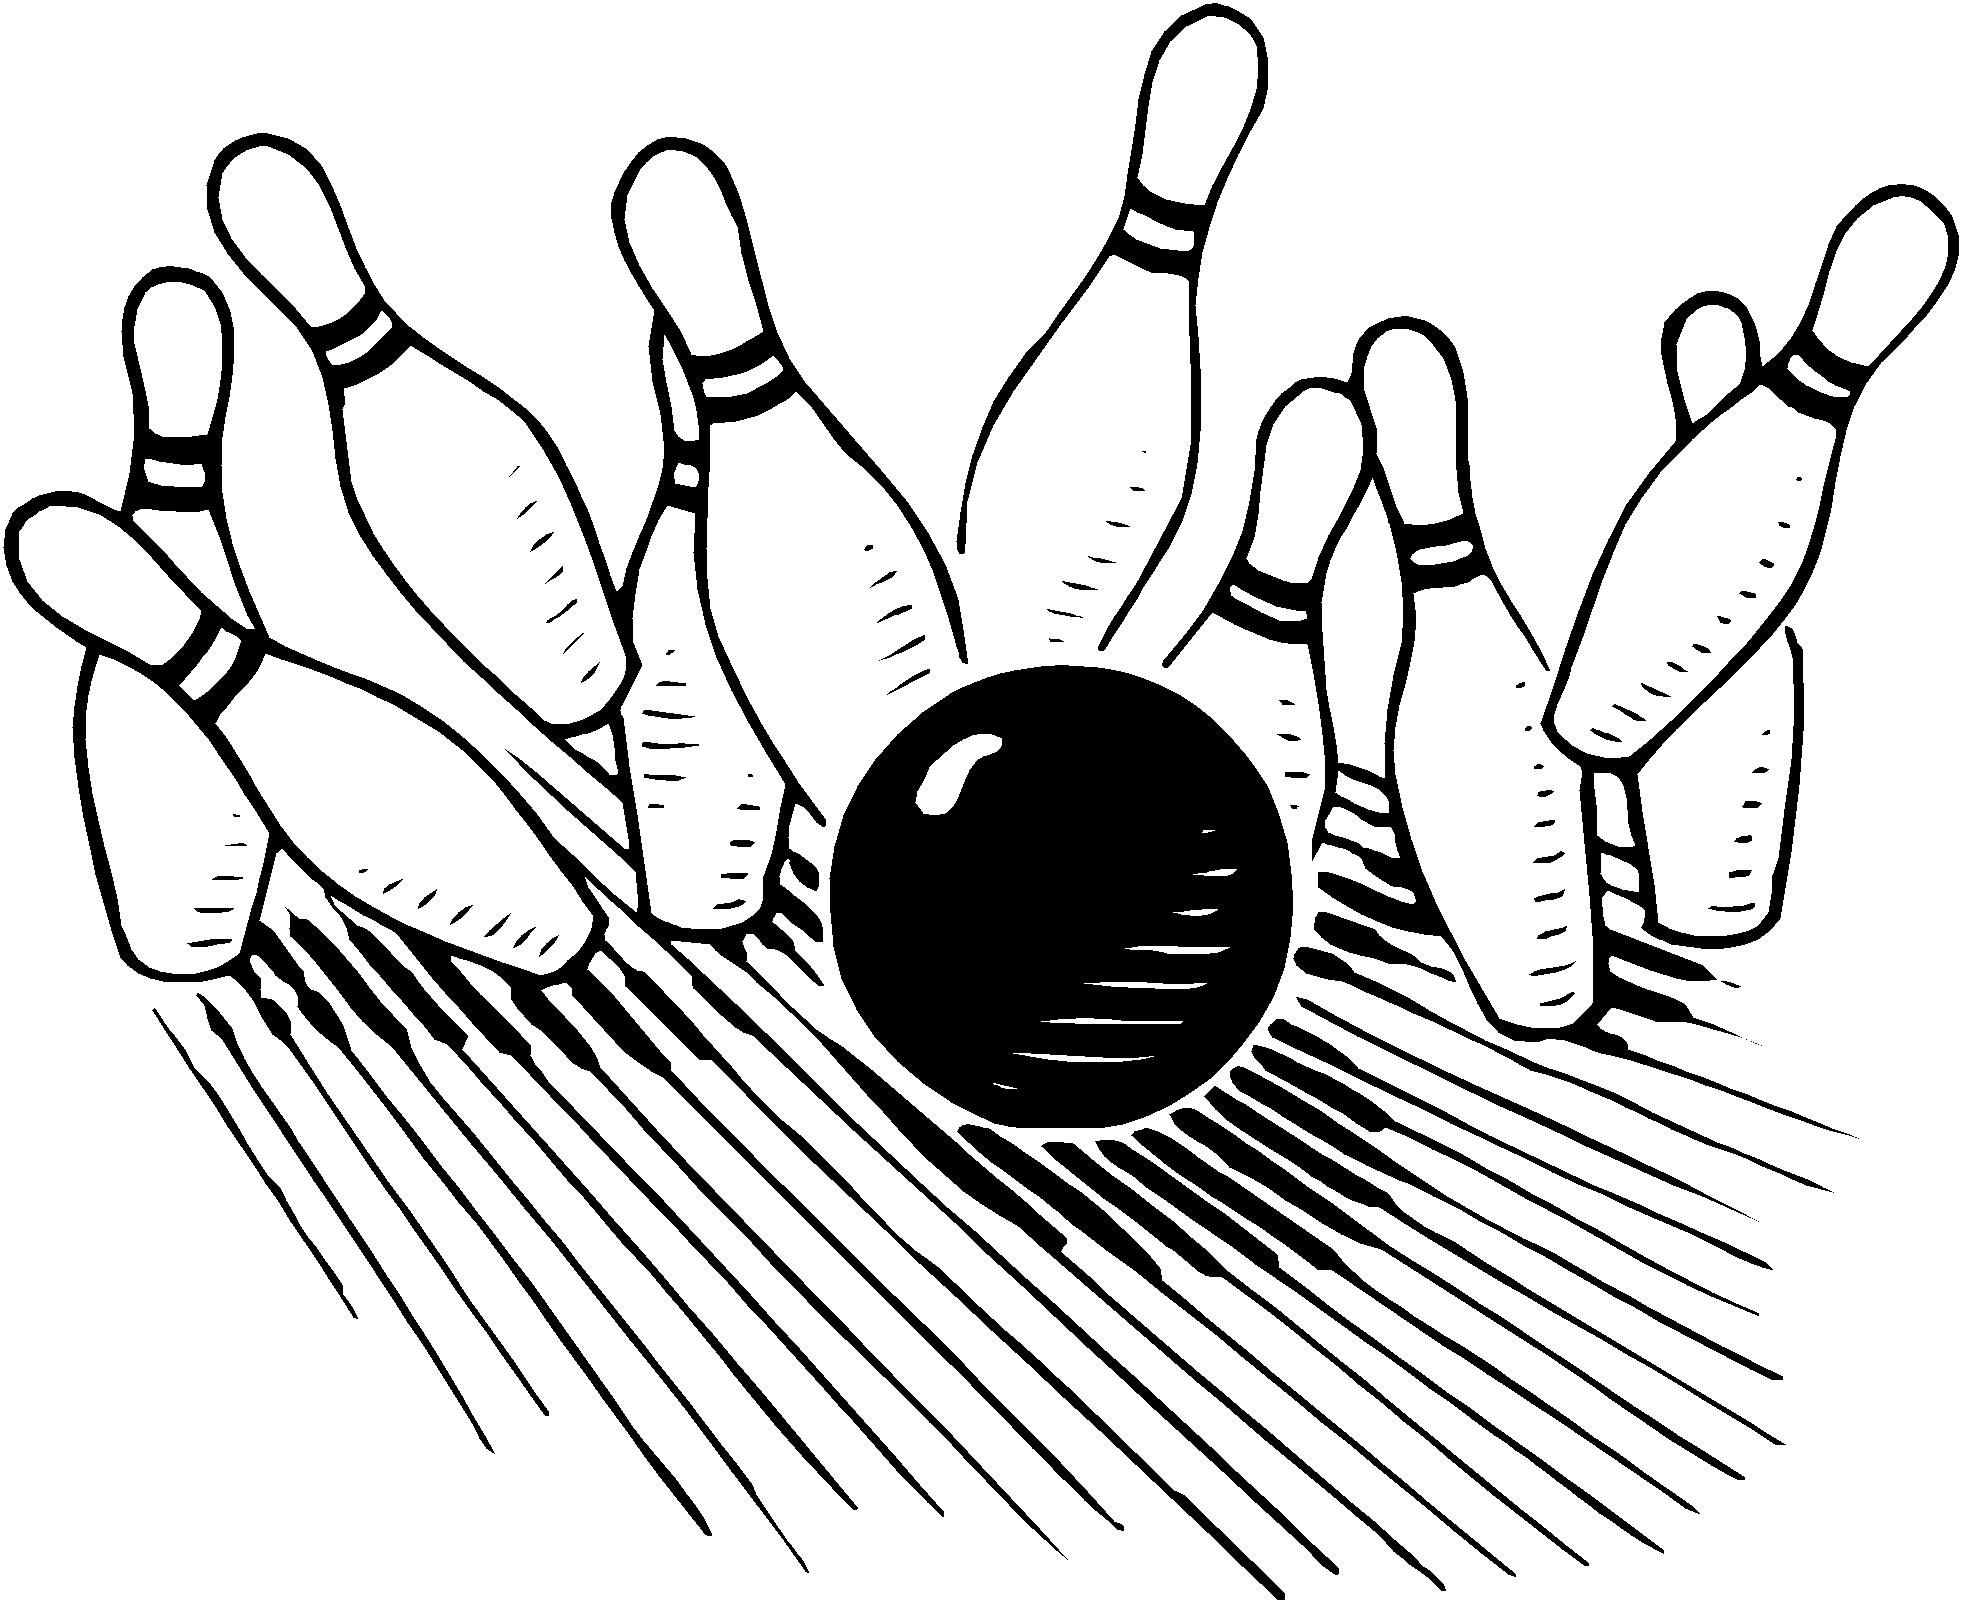 bowling clipart drawing